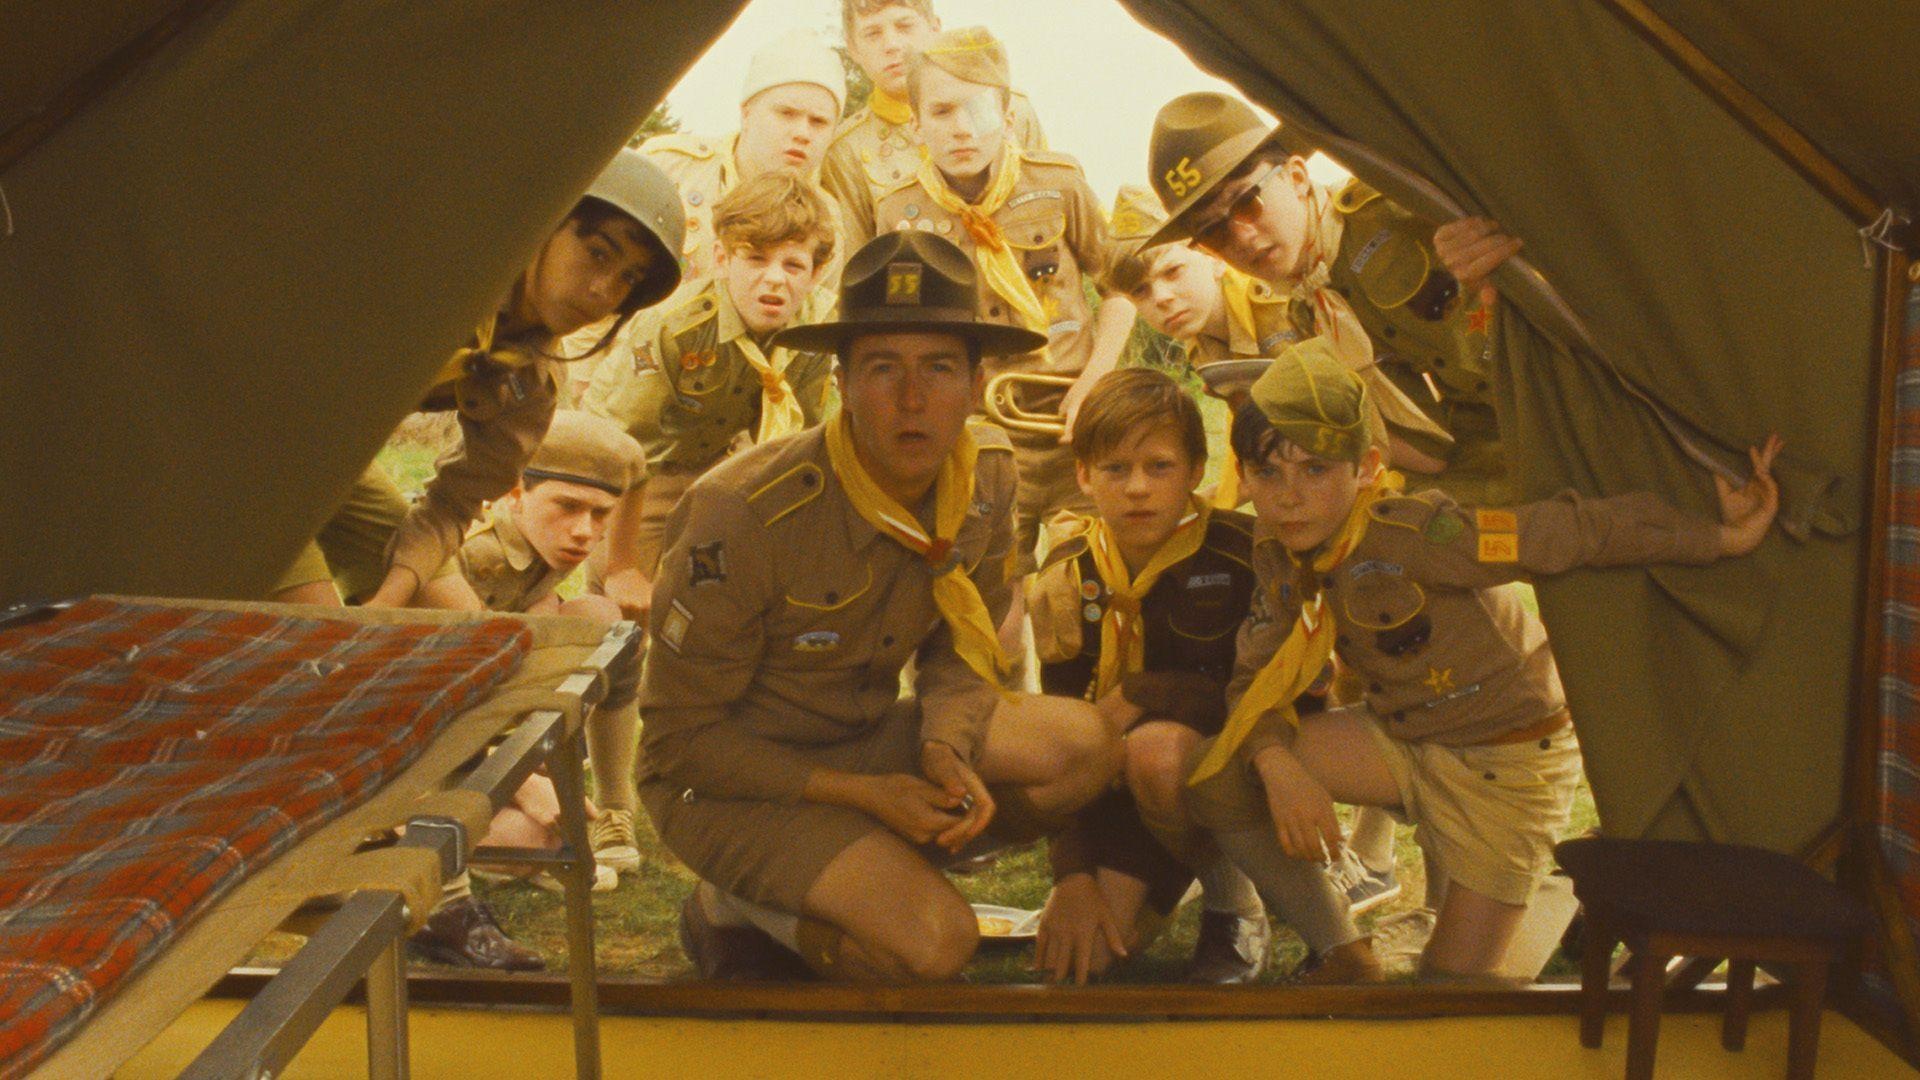 Moonrise Kingdom, Wes Anderson, Charming wallpapers, Sarah Thompson's collection, 1920x1080 Full HD Desktop